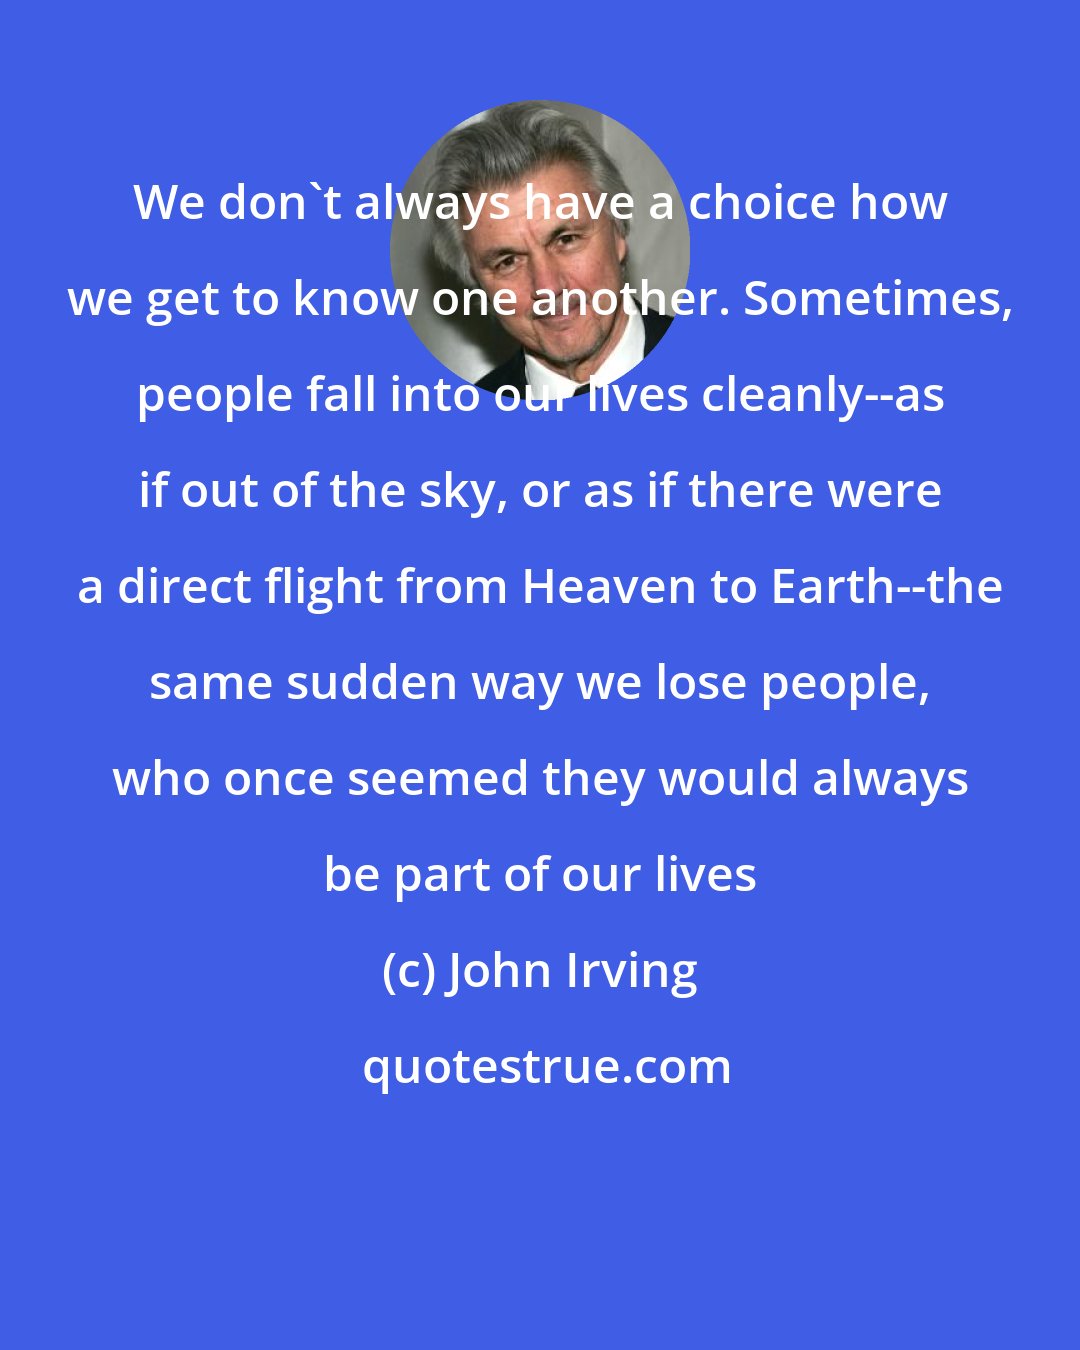 John Irving: We don't always have a choice how we get to know one another. Sometimes, people fall into our lives cleanly--as if out of the sky, or as if there were a direct flight from Heaven to Earth--the same sudden way we lose people, who once seemed they would always be part of our lives